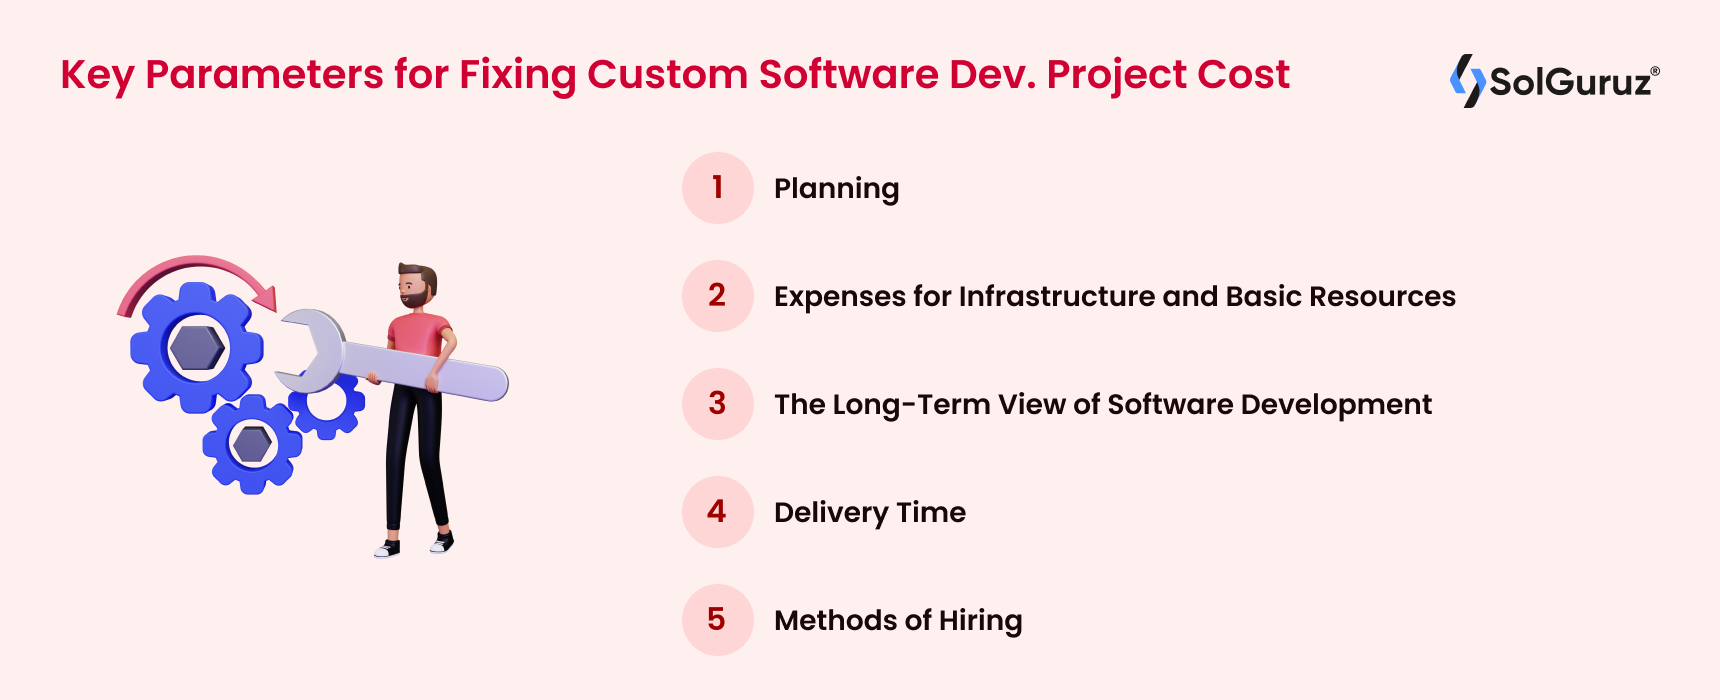 Key Parameters for Fixing Custom Software Development Project Cost